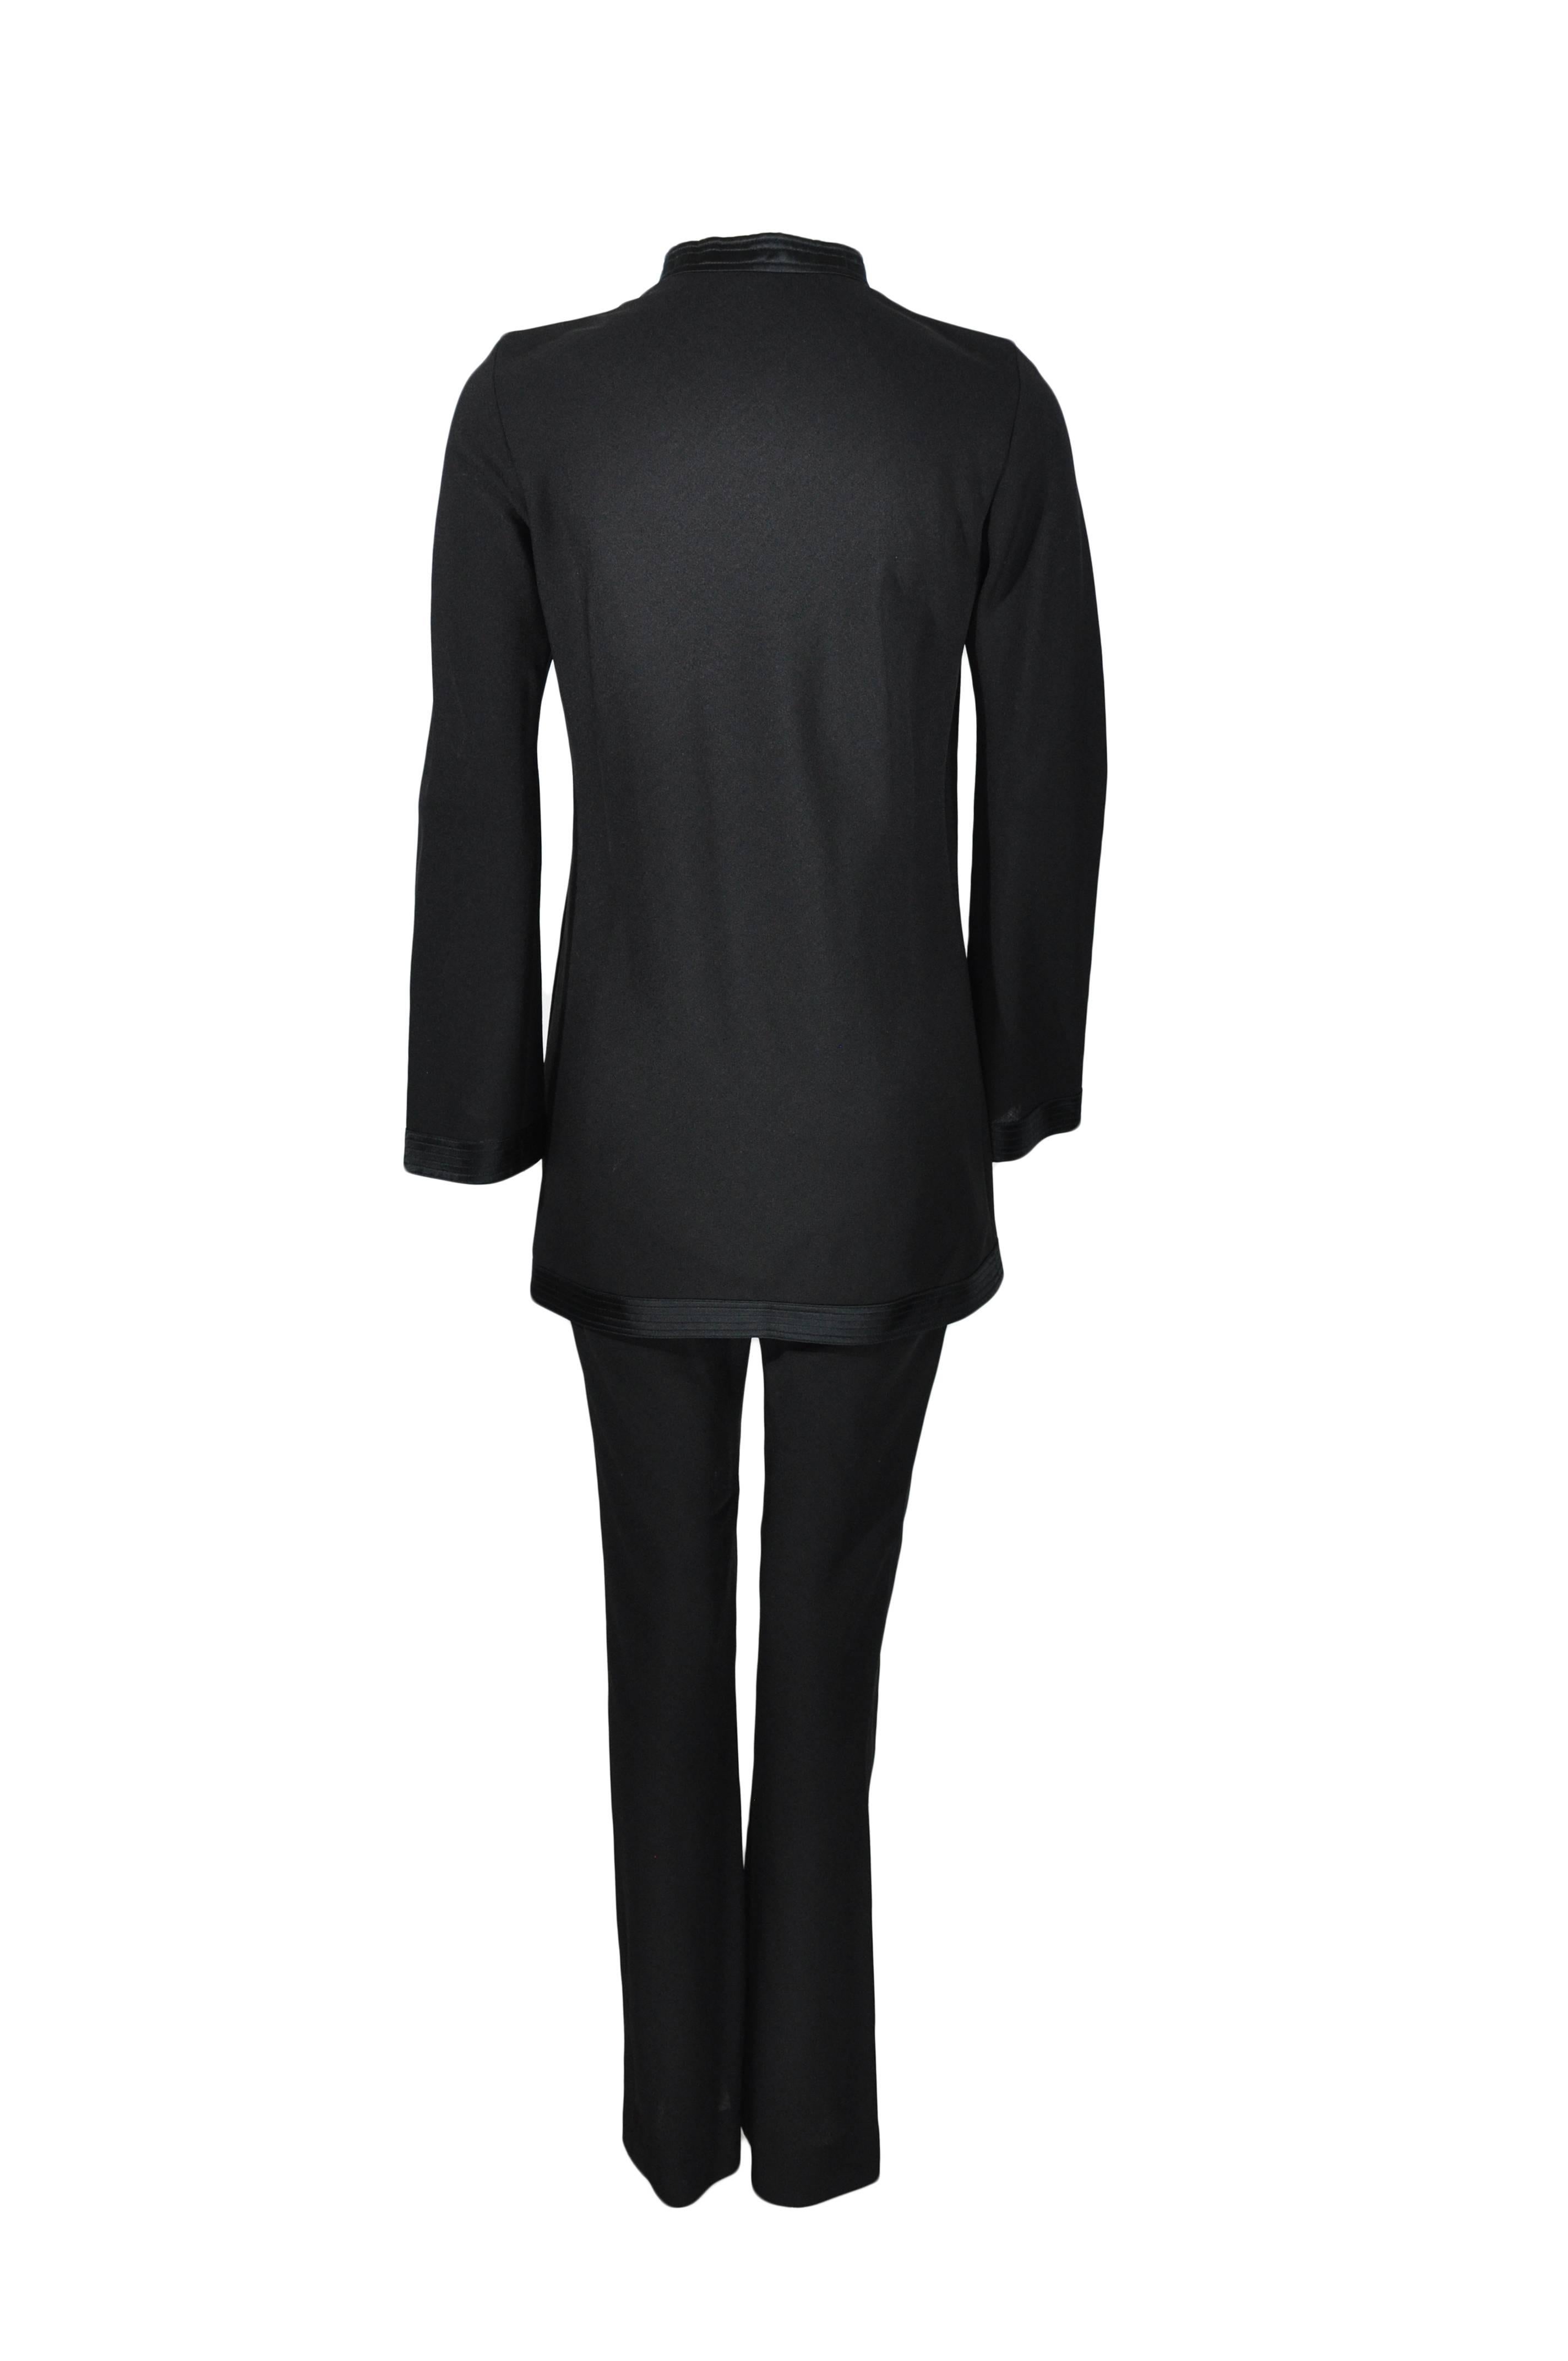 The A-line long sleeves tunic top features with a black satin trimmed mandarin collar and cutout front, snap fastening at neck with a detachable patent leather daisy.  The  pants are trimmed with black satin at waist and decorated with a detachable